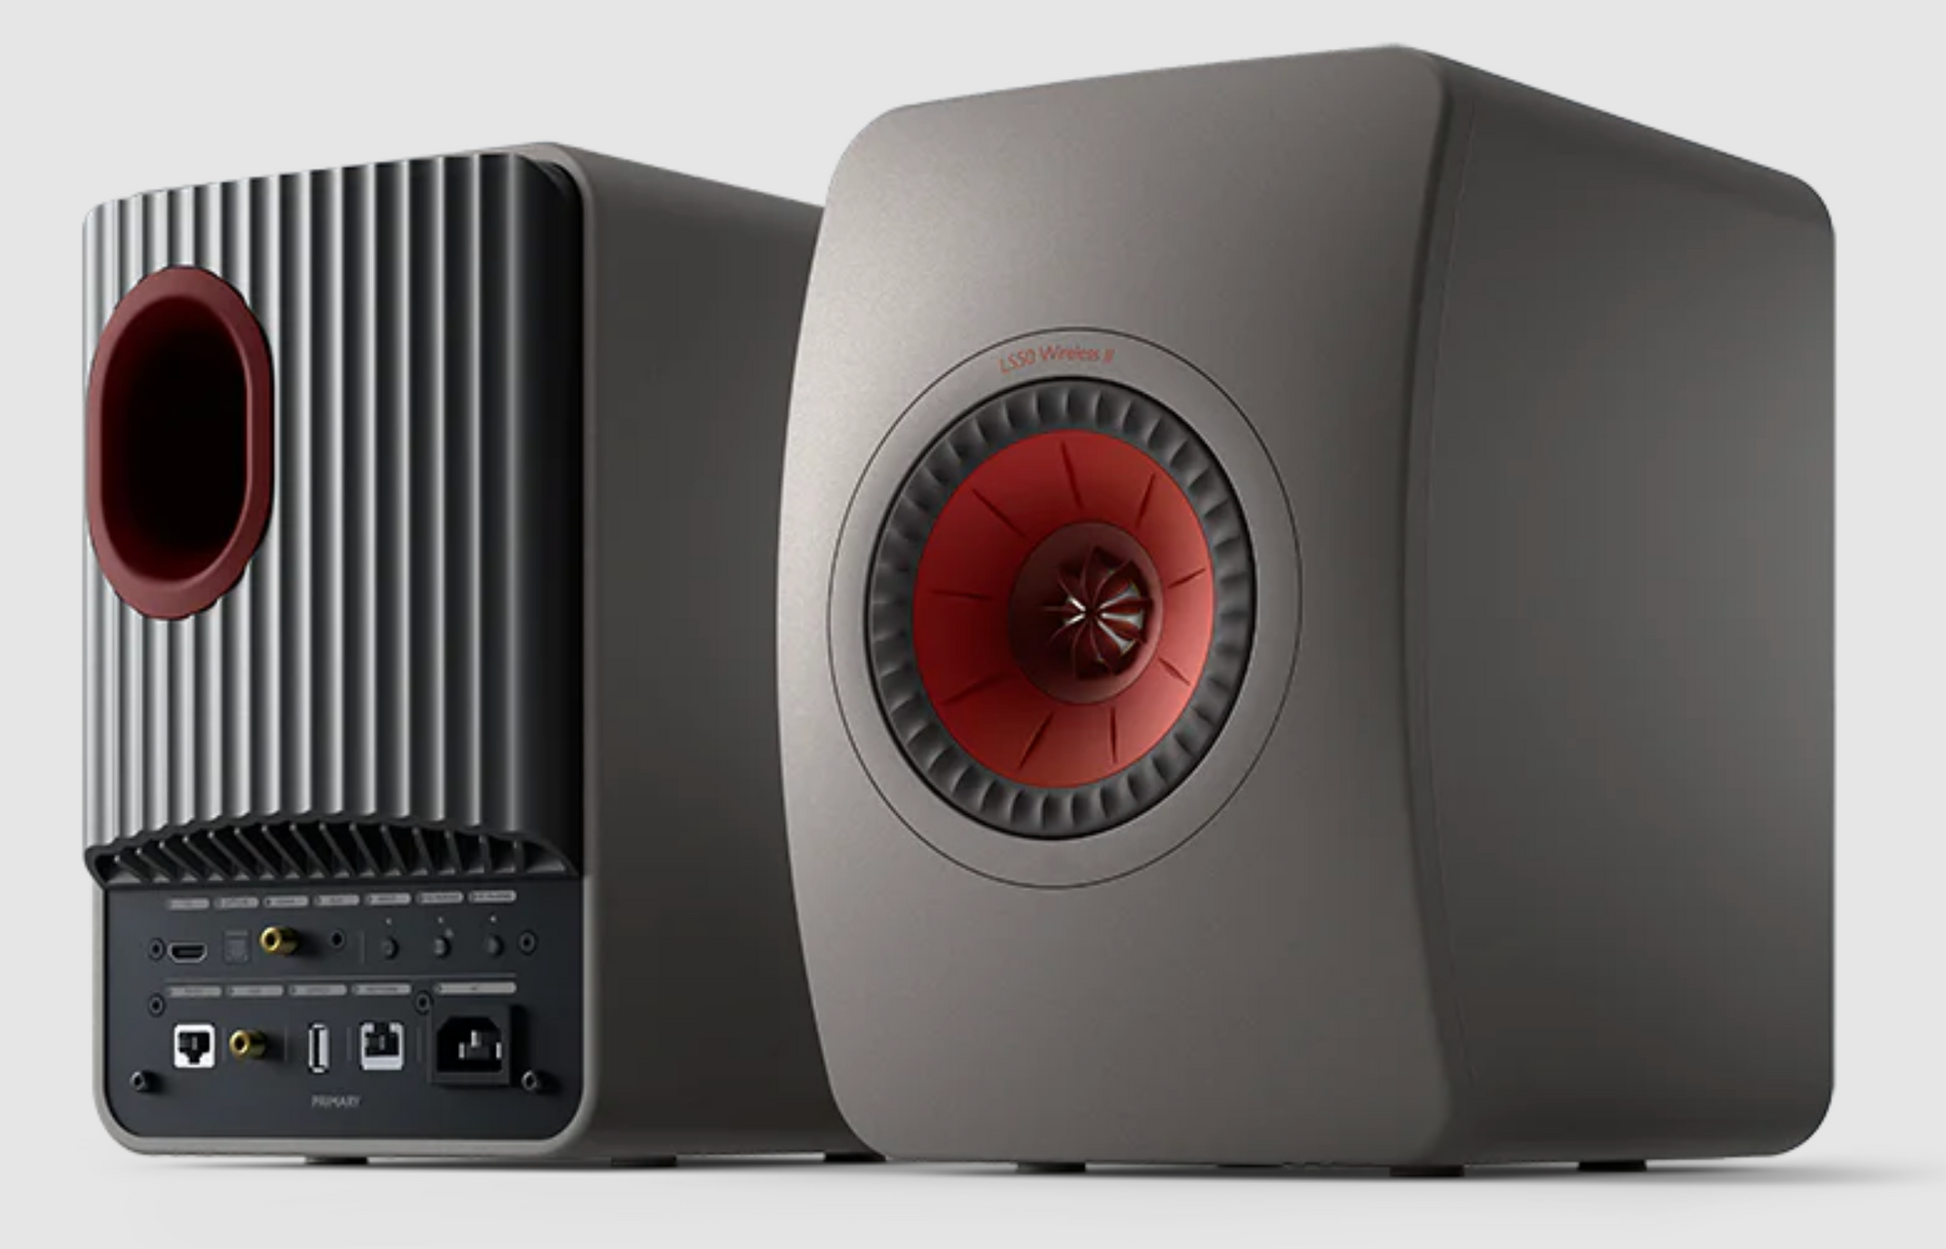 KEF LS50 Wireless II Speakers in Titanium Gray - front and back